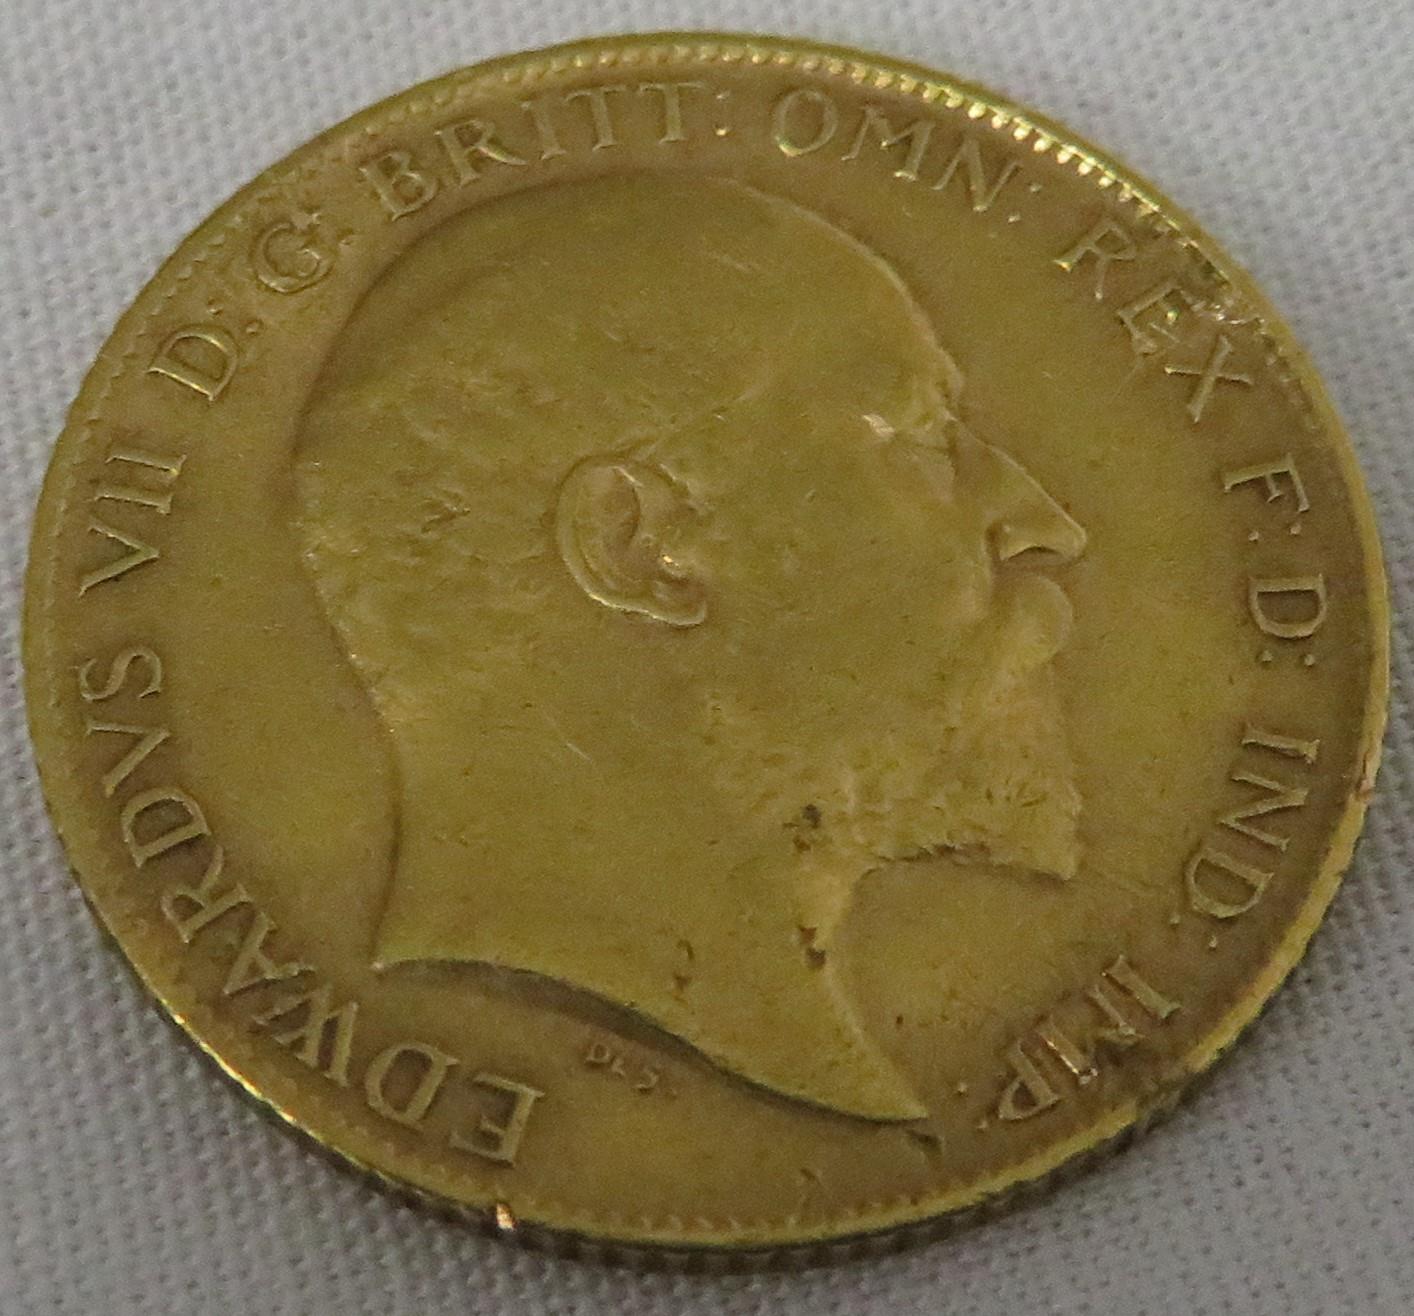 1910 half sovereign - Image 2 of 2